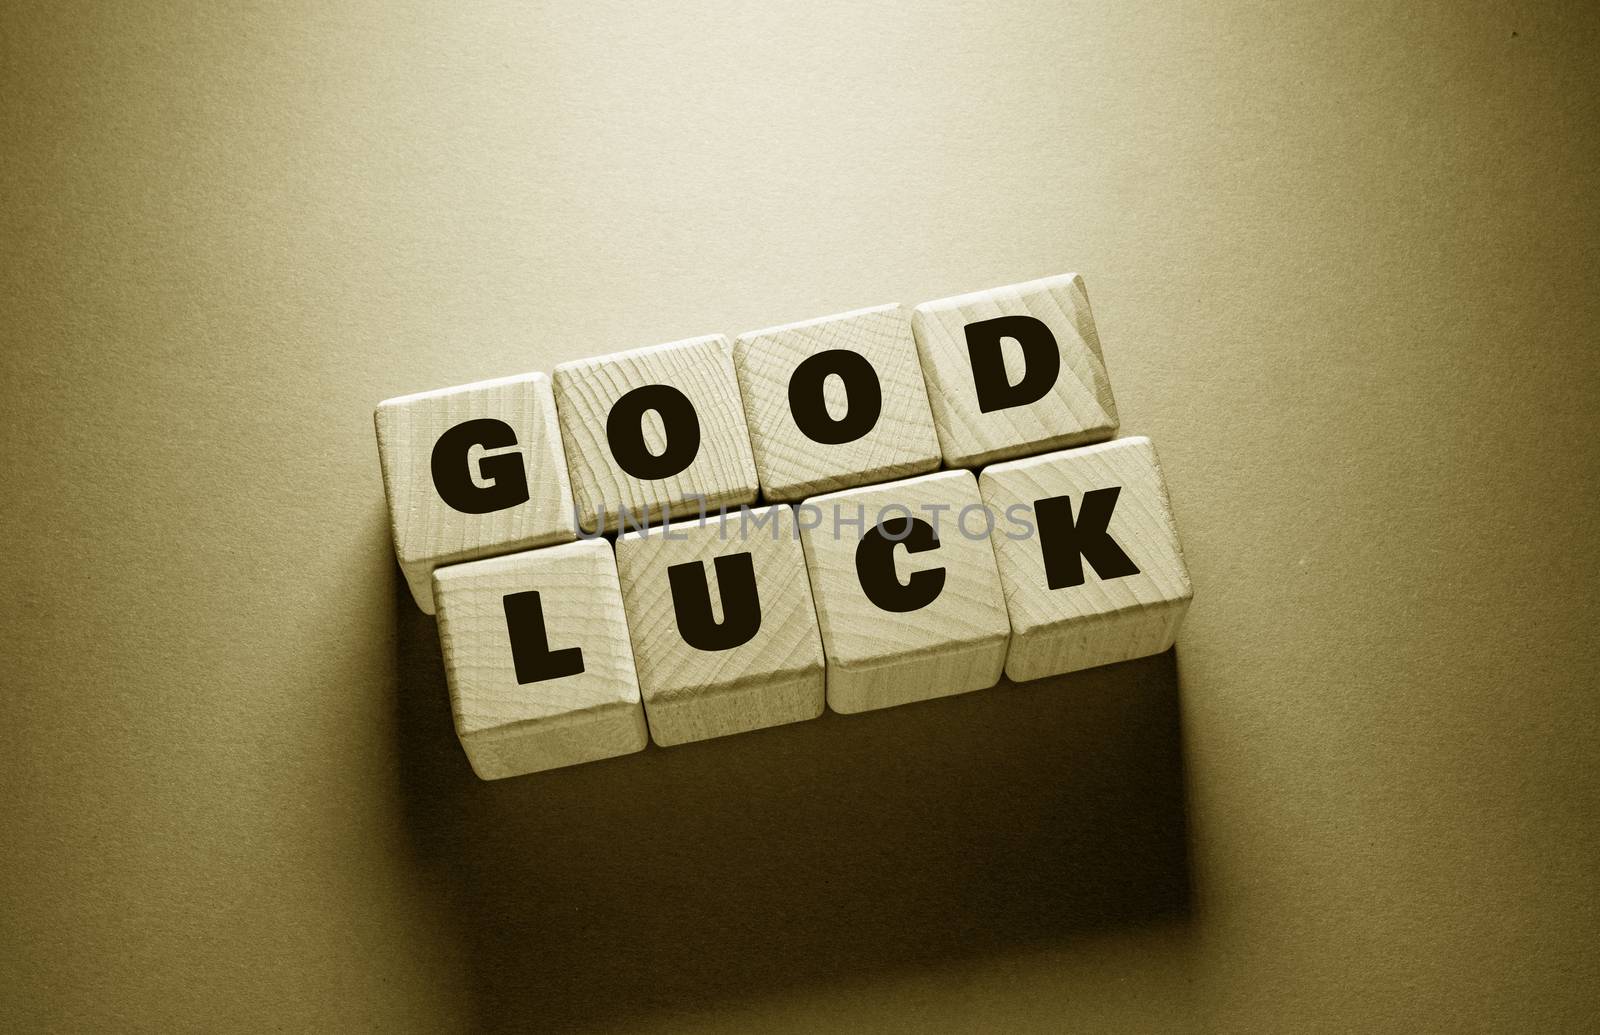 Good Luck Word with Wooden Cubes by Jievani